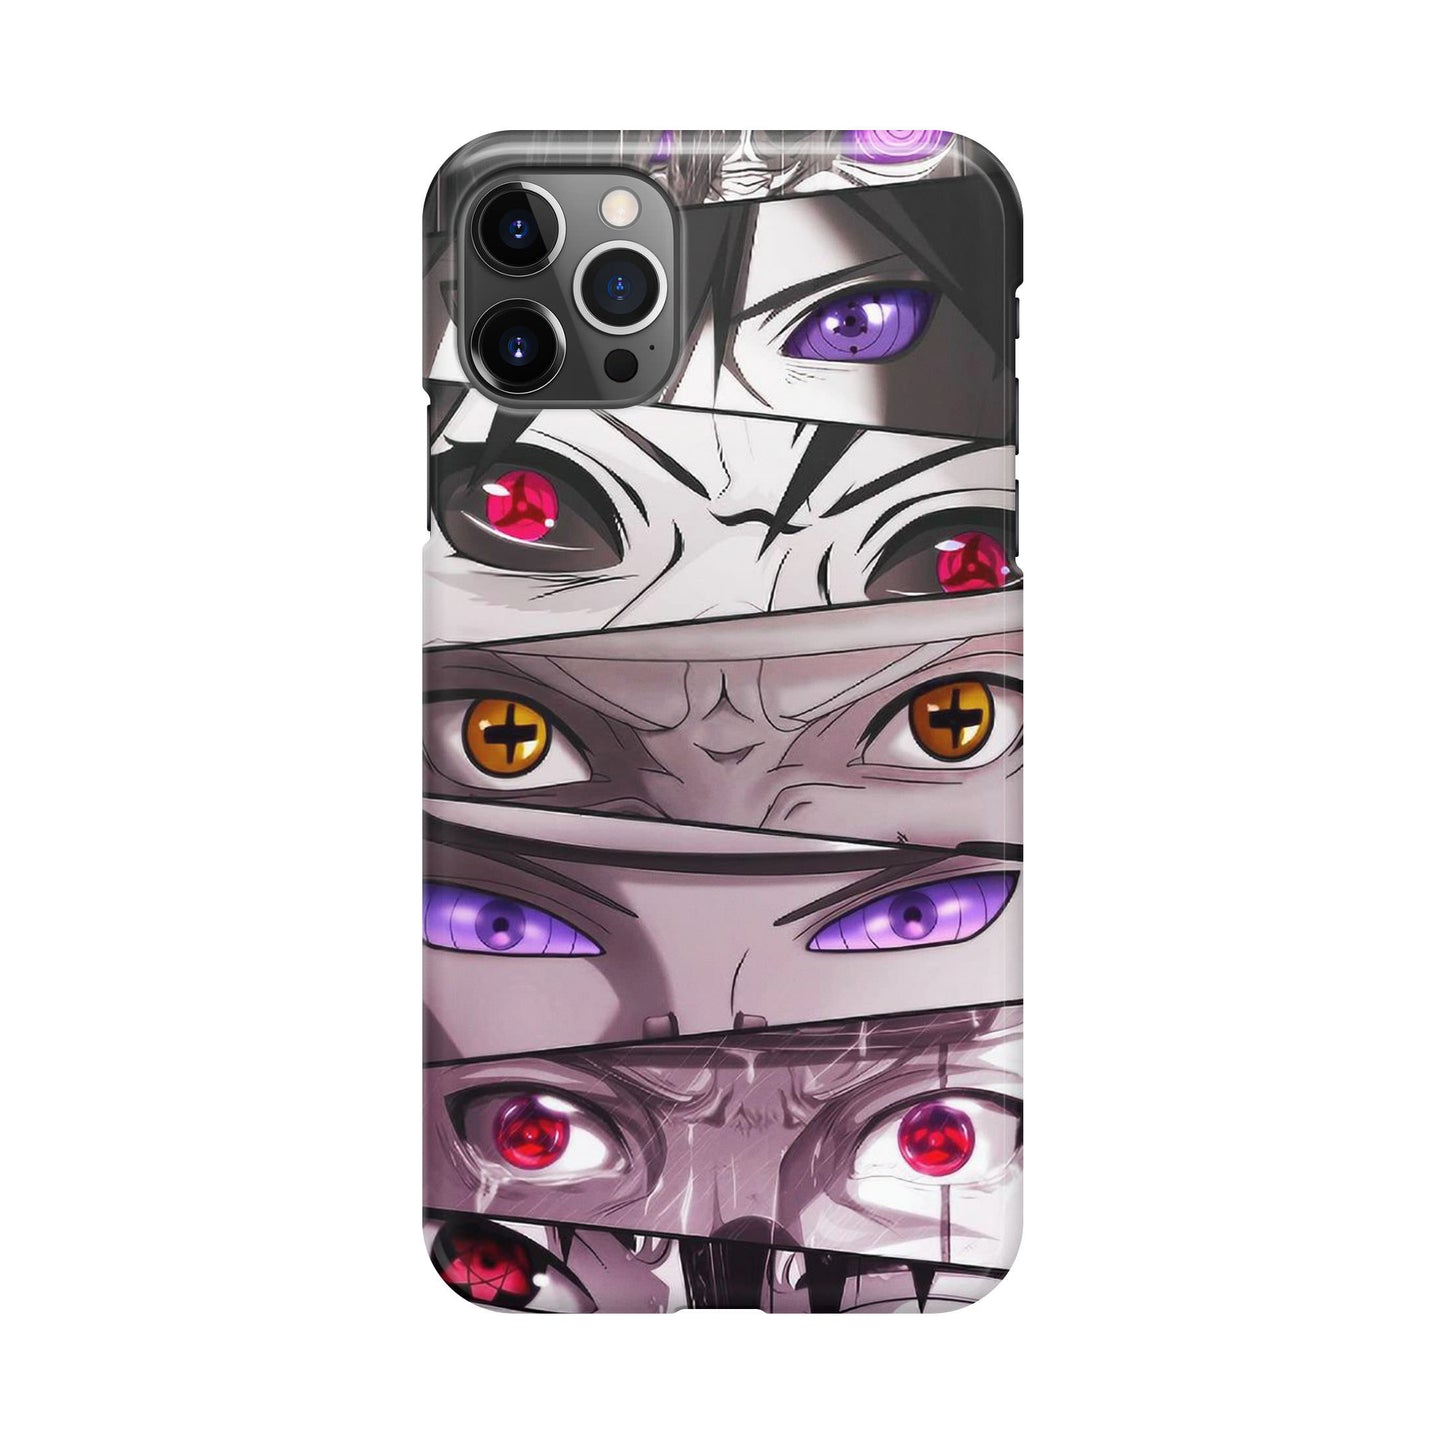 The Powerful Eyes iPhone 12 Pro Case